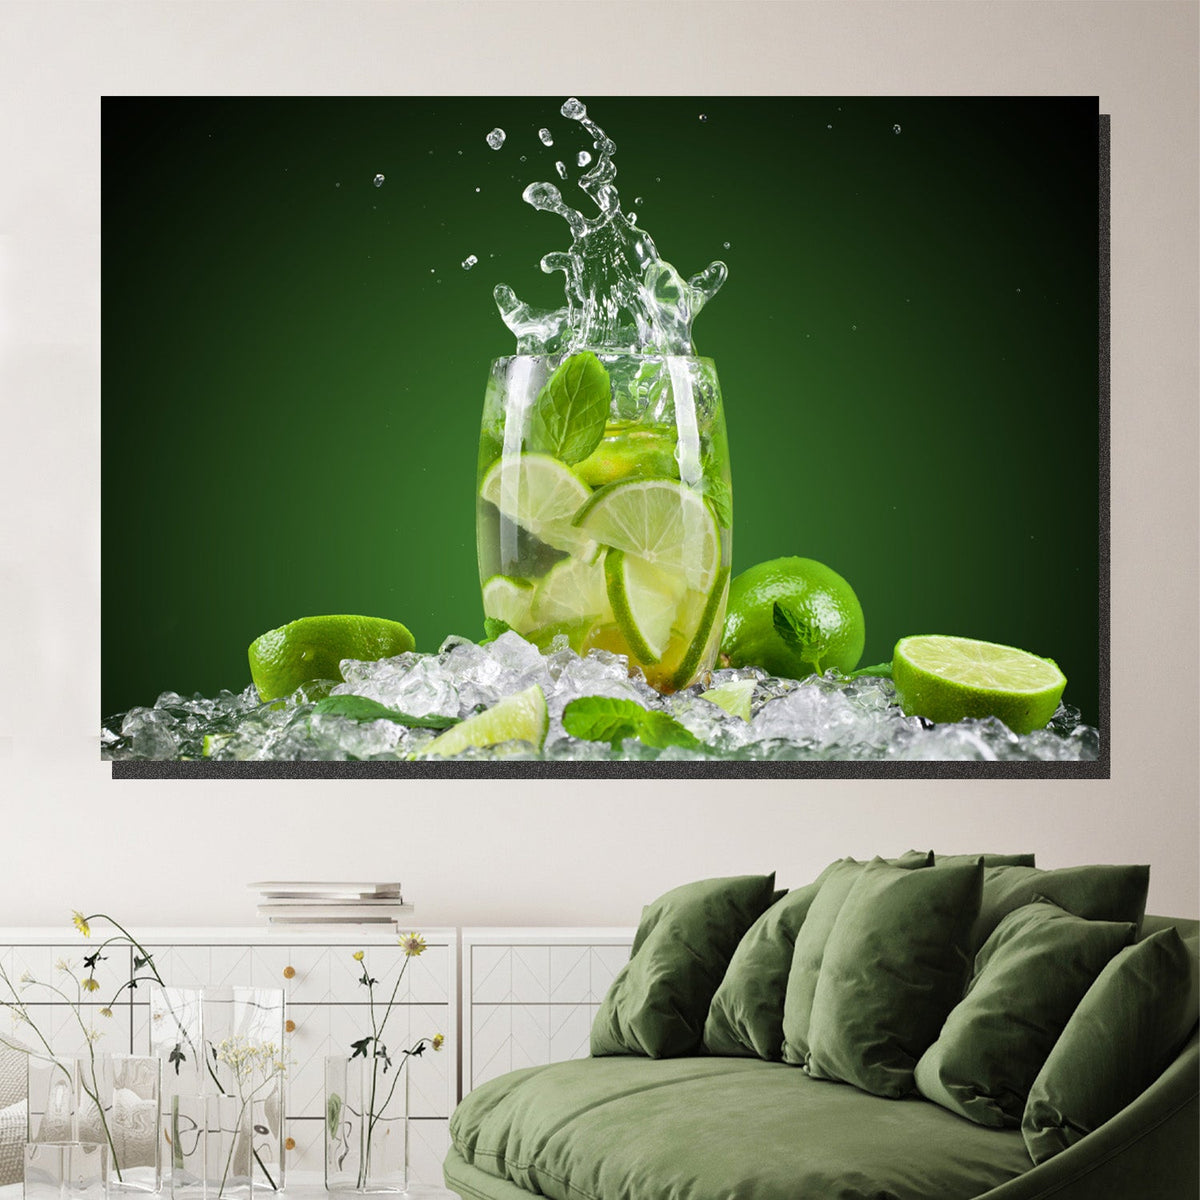 https://cdn.shopify.com/s/files/1/0387/9986/8044/products/MojitoCanvasArtprintStretched-2.jpg